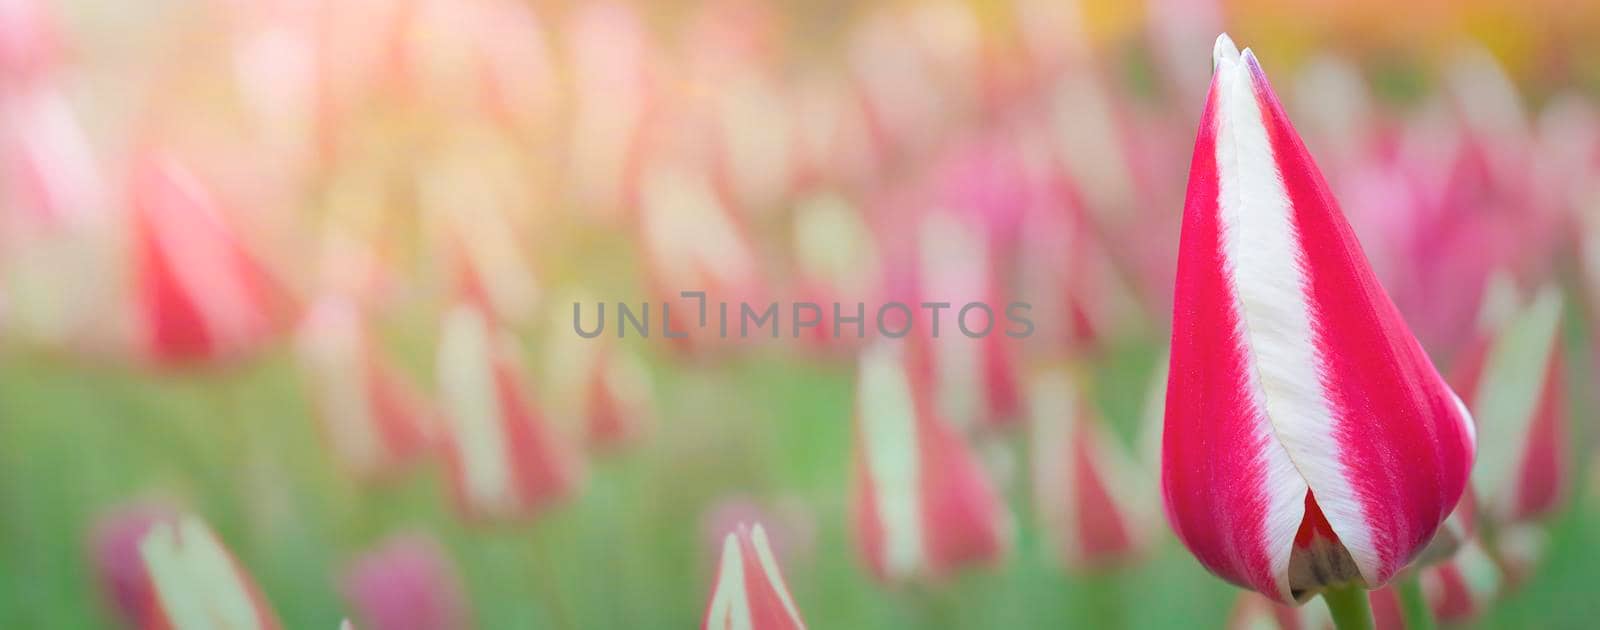 Striped tulip banner on a blurred background. Beautiful flowers. by Sviatlana